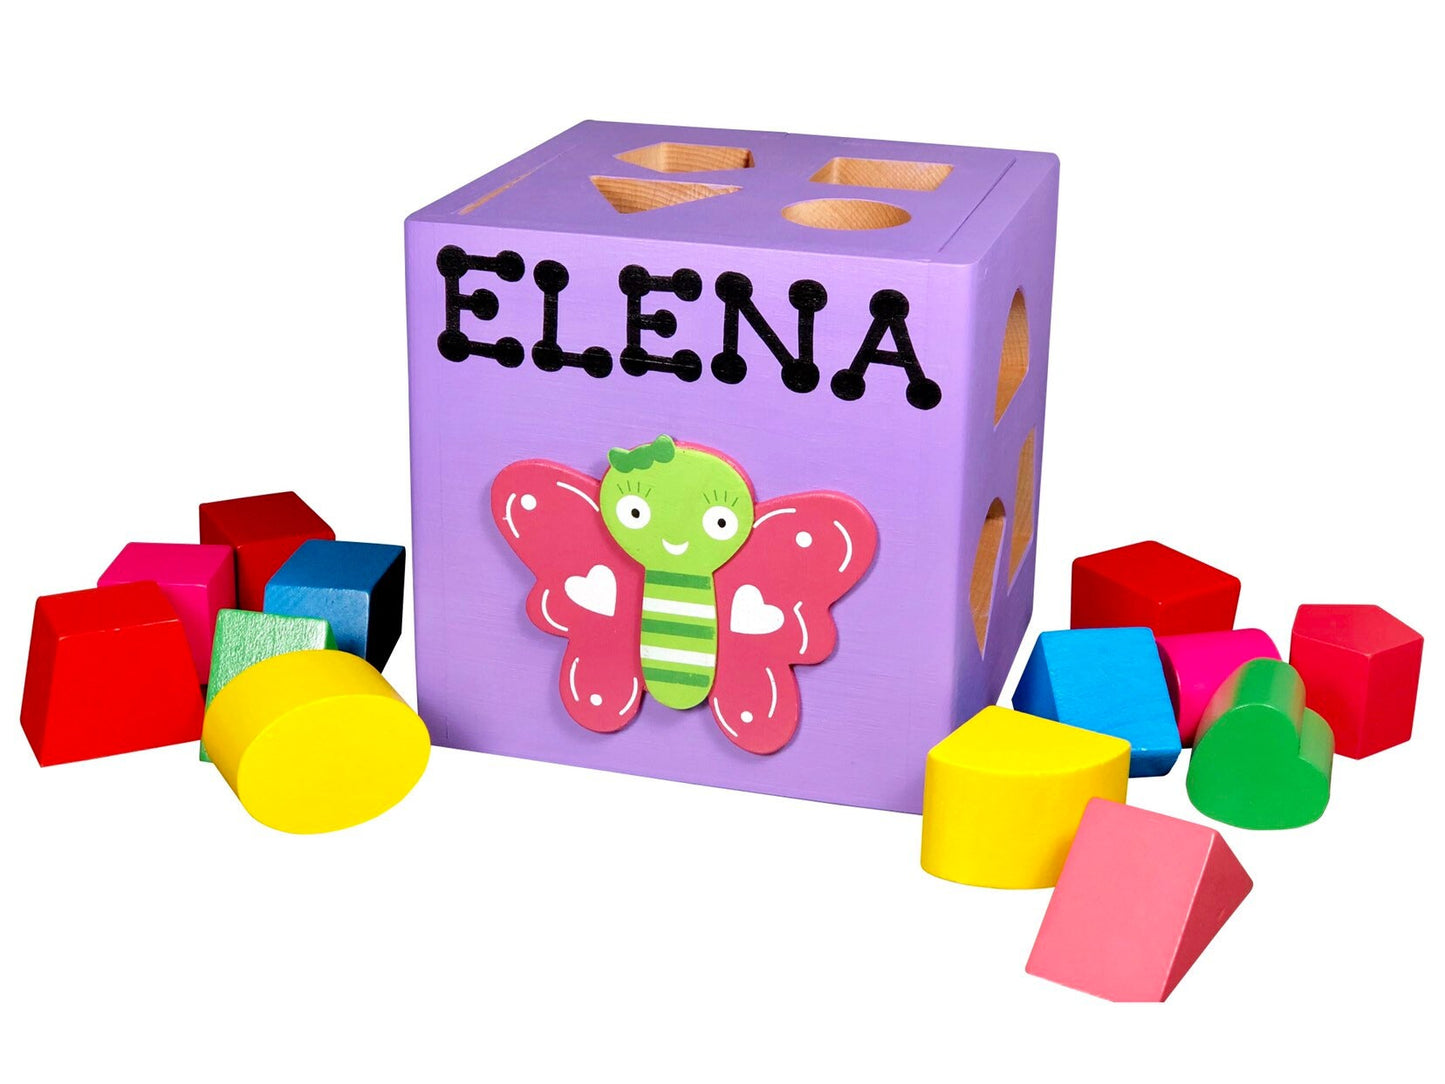 Wooden zebra toys for children eco friendly shapes box learn colors shapes letters read your name educational toys zebra safari animal toys